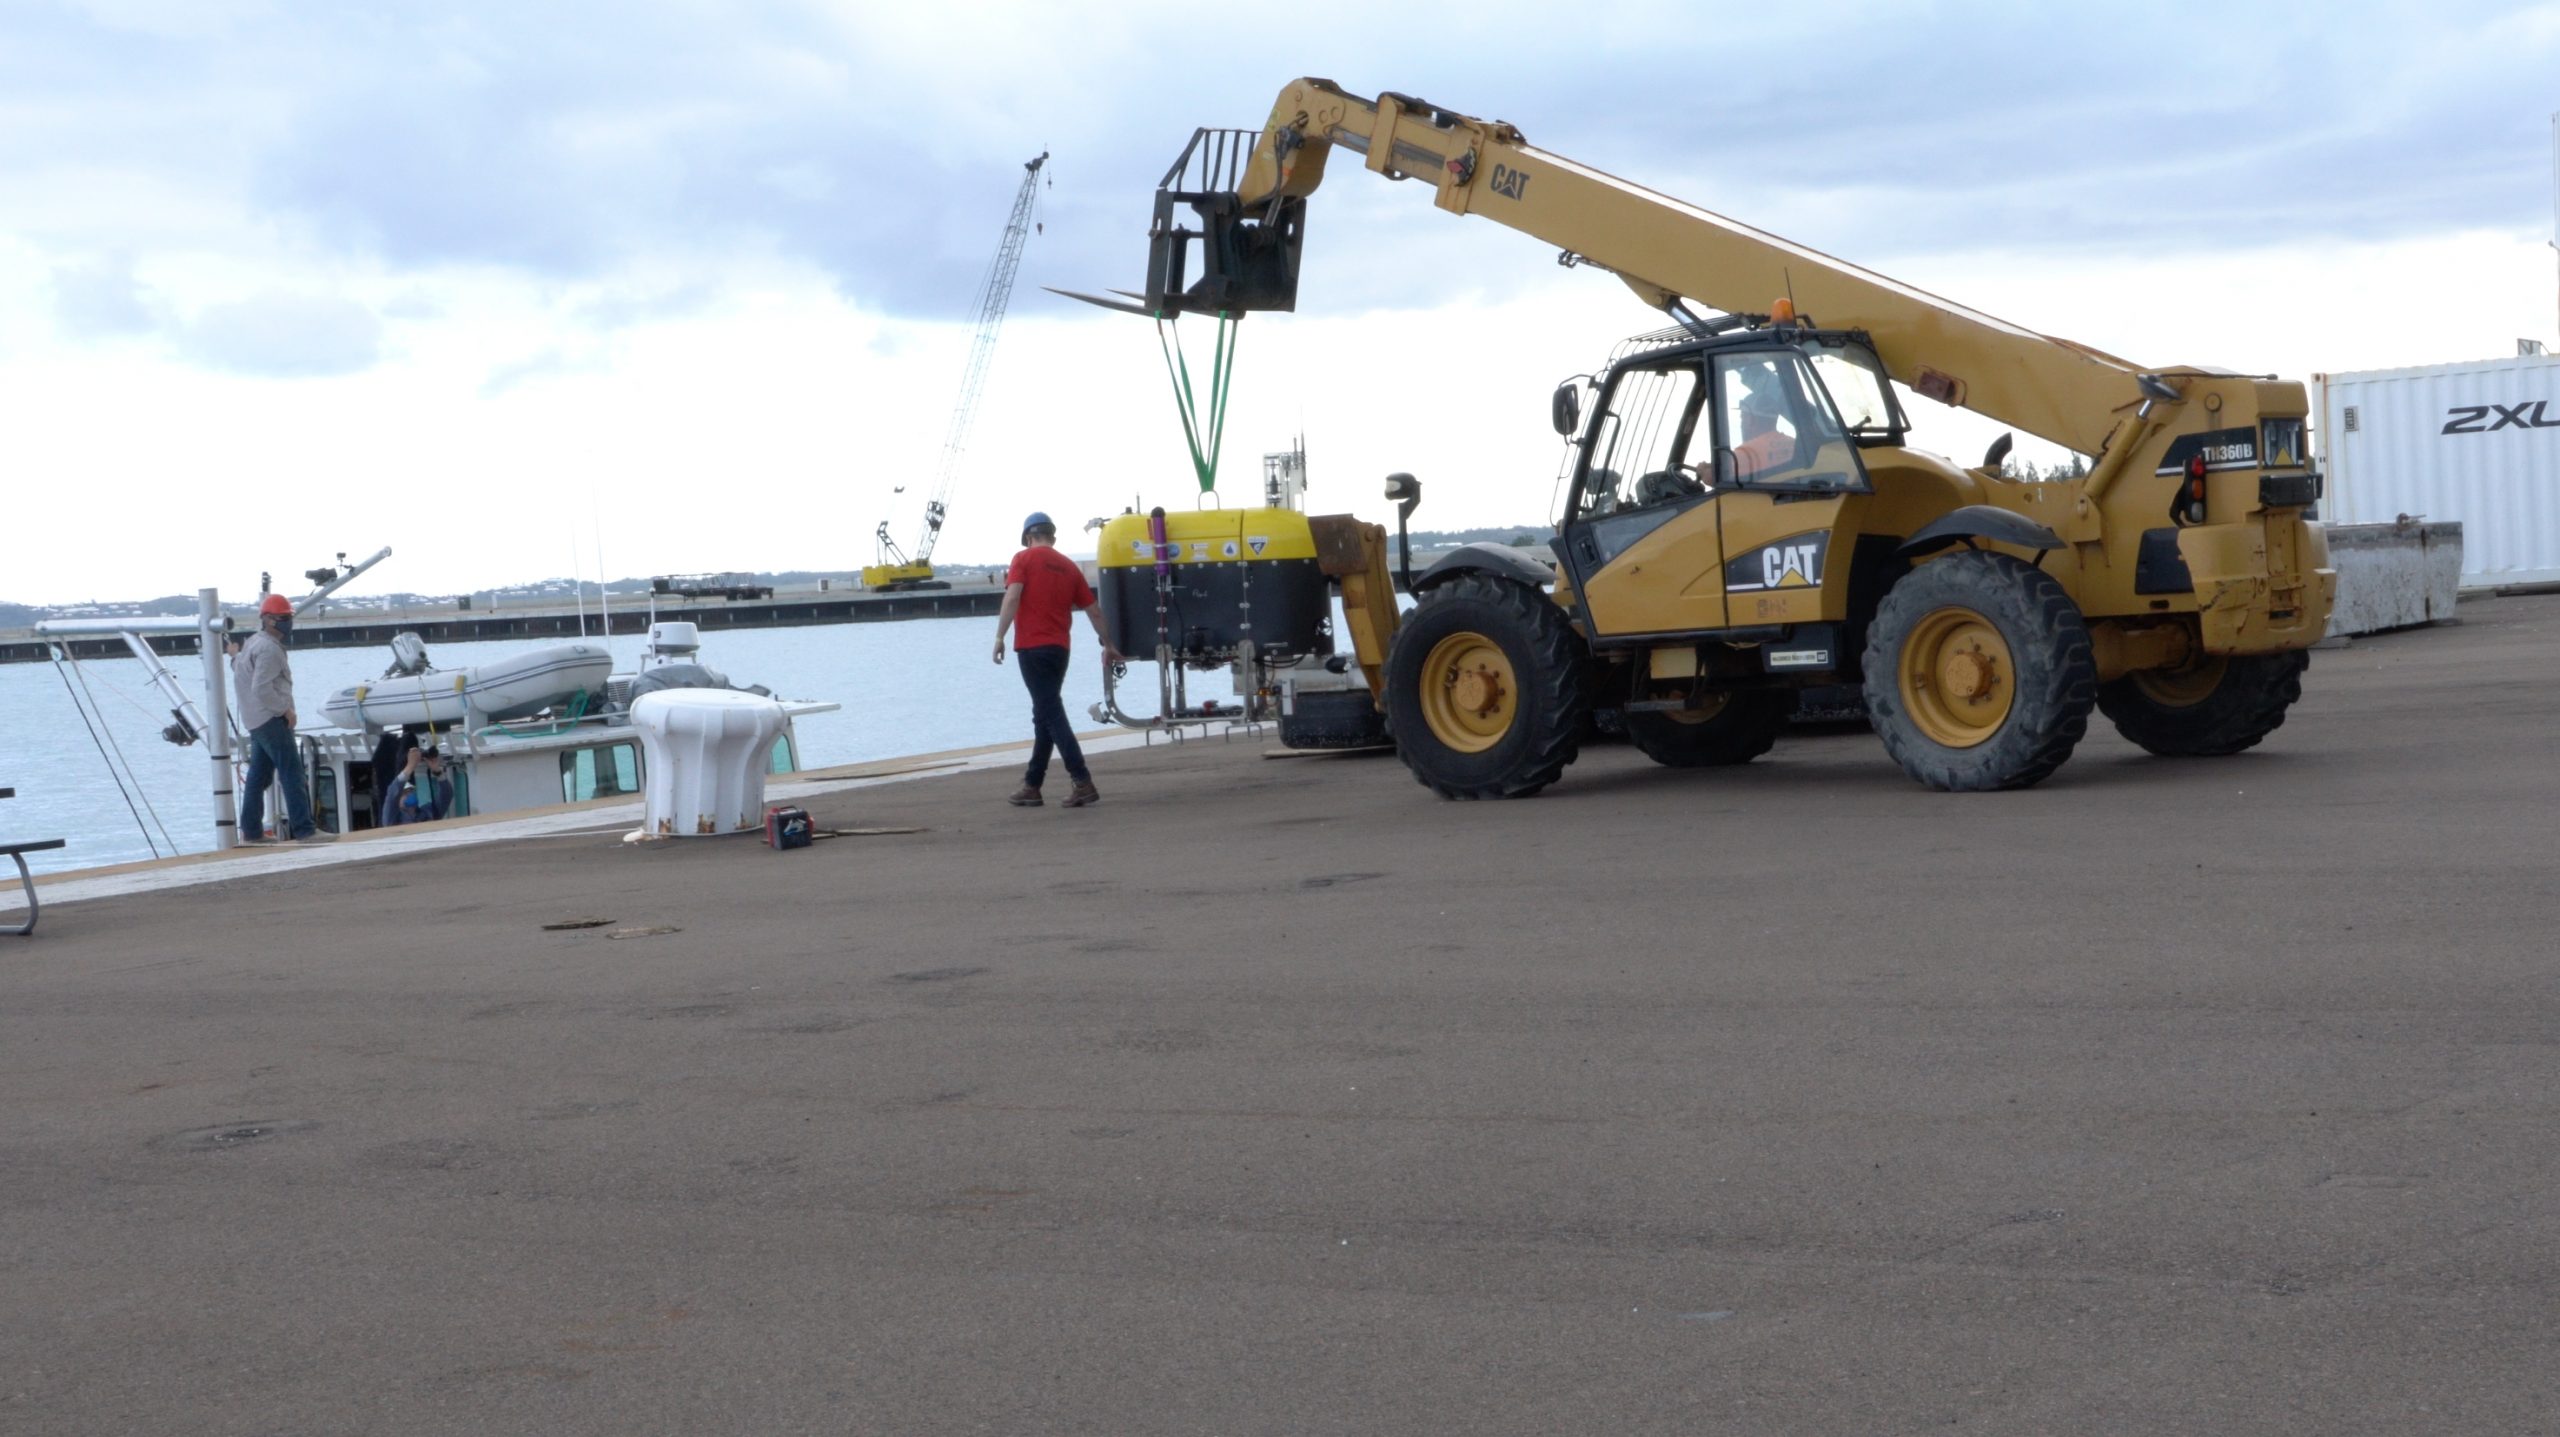 Engineer Fredrick Marin “walks” Mesobot and the forklift to Catapult, which will transport it to a marina for testing in saltwater.